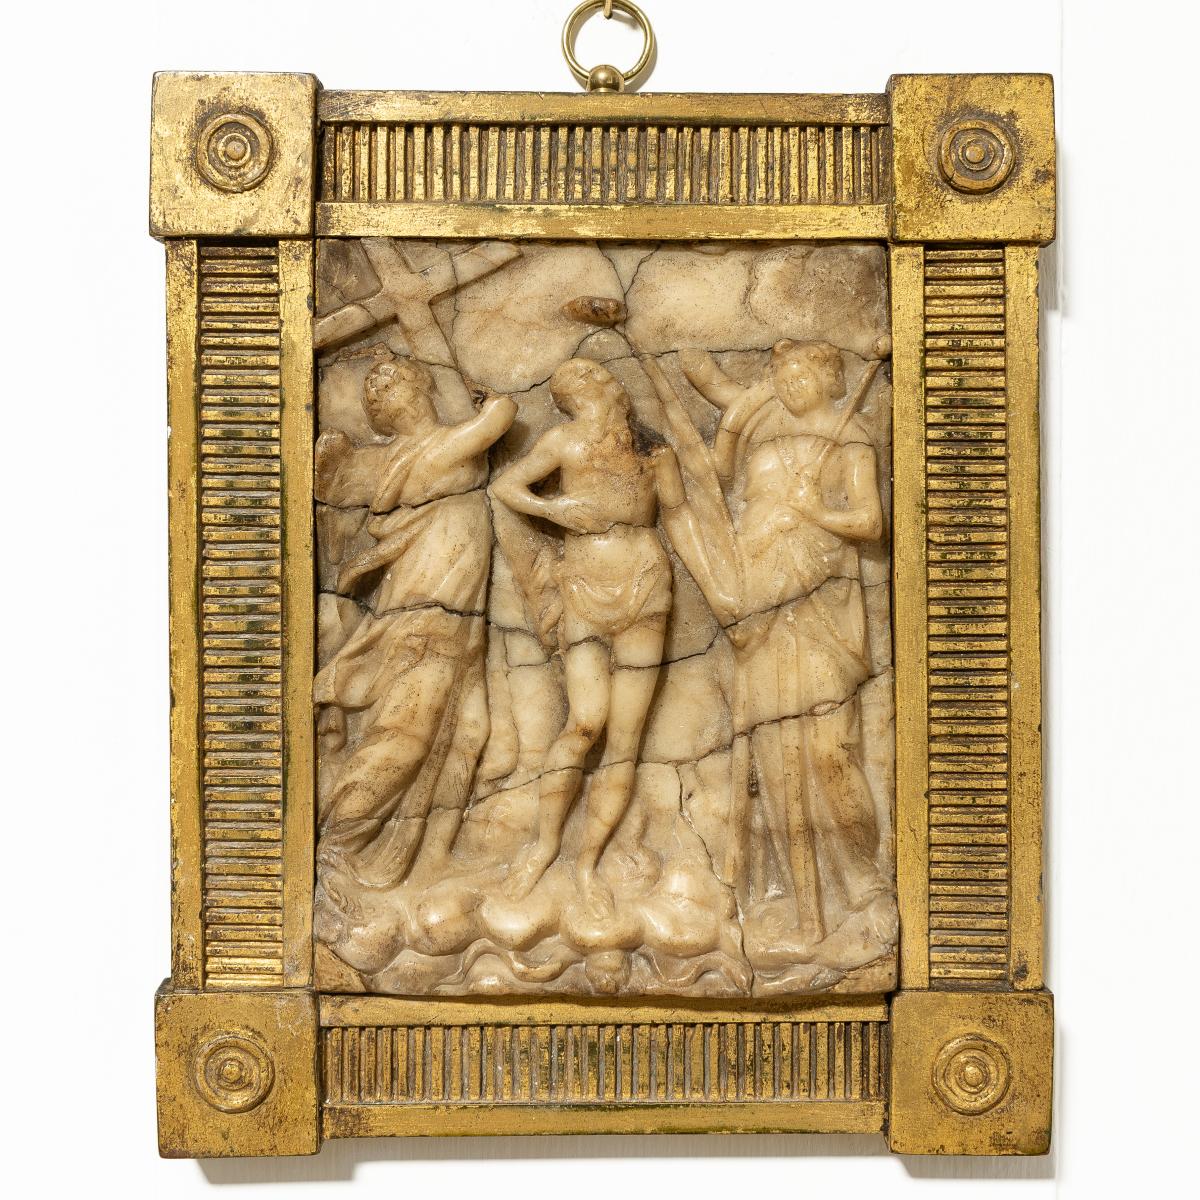 A 16th century alabaster relief-carved panel, Malines (Mechelen), circa 1575